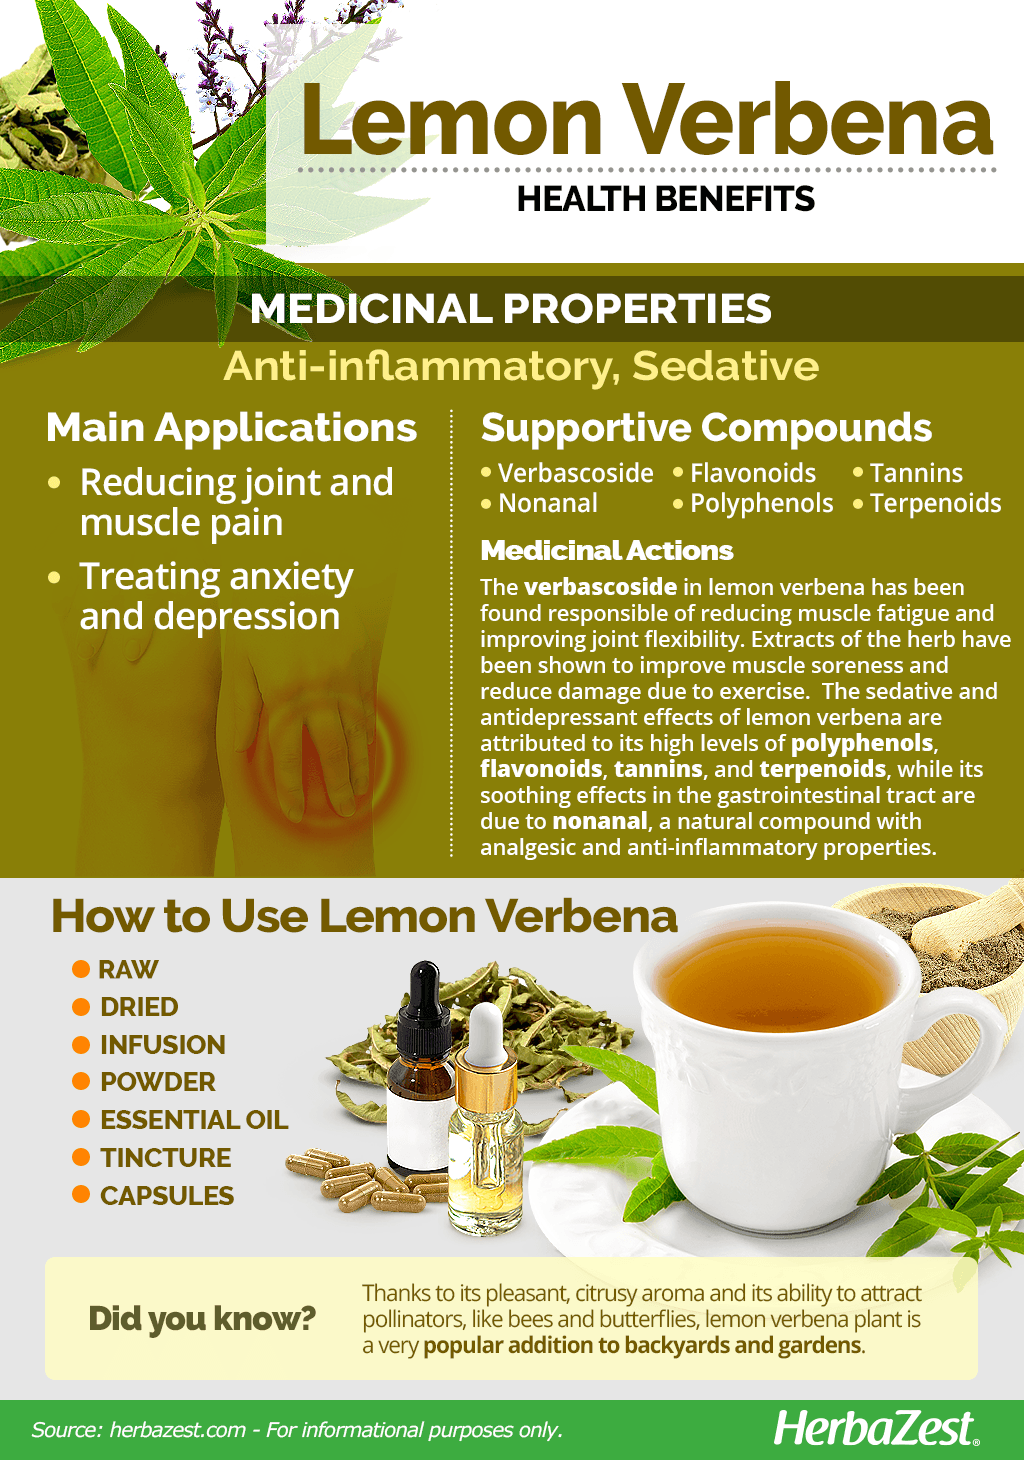 The Health Benefits and Uses of Lemon Verbena - HubPages